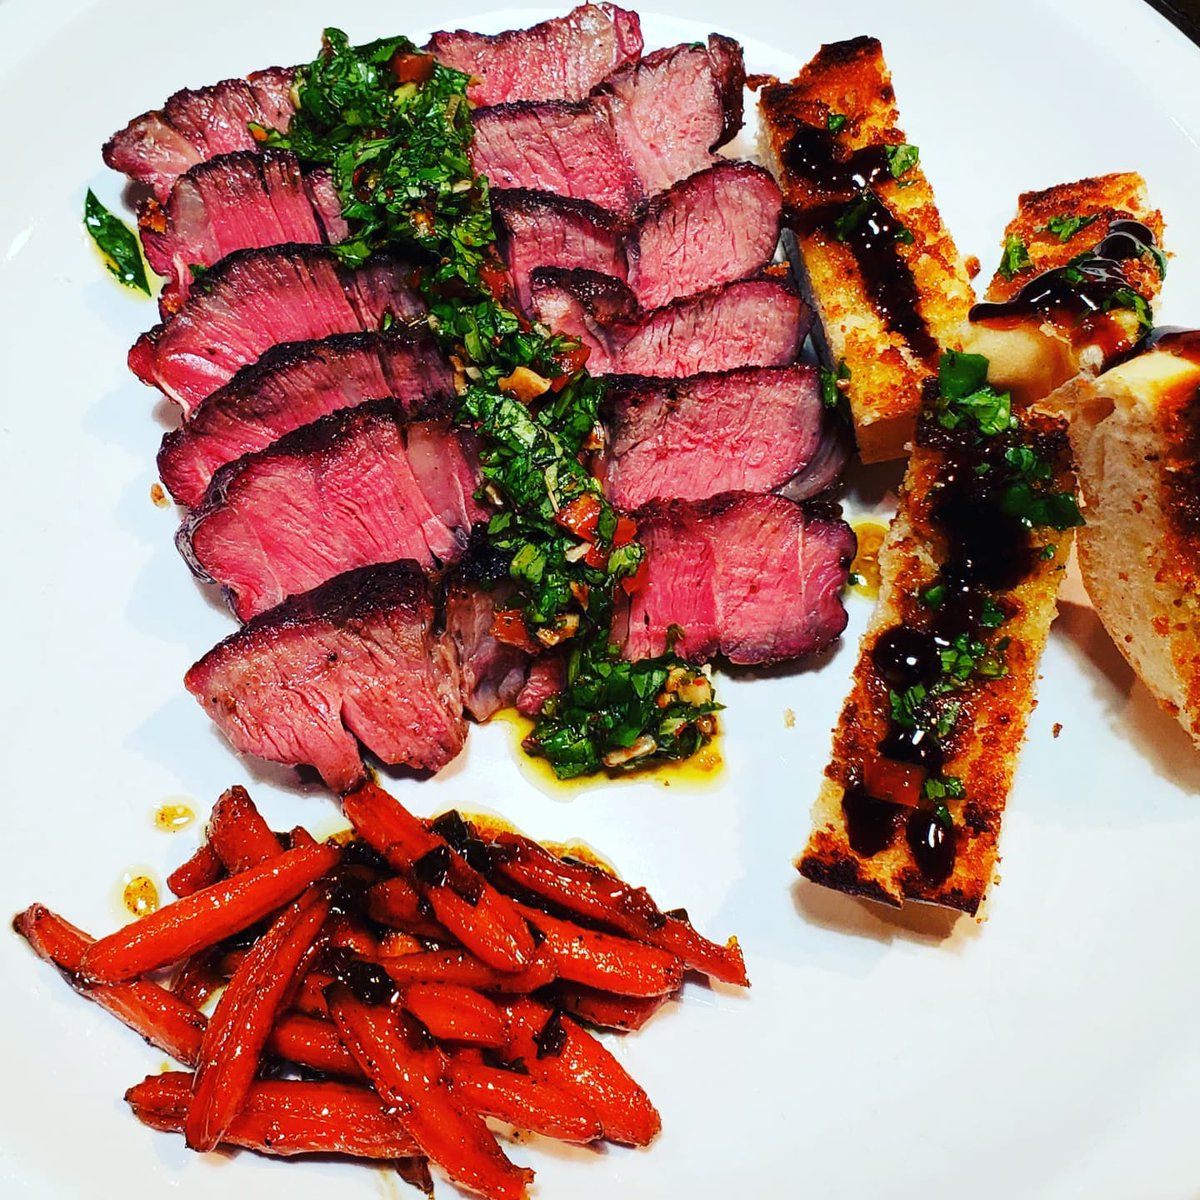 Smoked, reverse seared ribeye! Smoked for 45 minutes at 180° then seared over hot charcoal. Absolutely phenomenal! Homemade chimichurri sauce, homemade garlic bread with a balsamic reduction and a side of caramelized honey glazed carrots. 

#ilovecooking
#itsmypassion